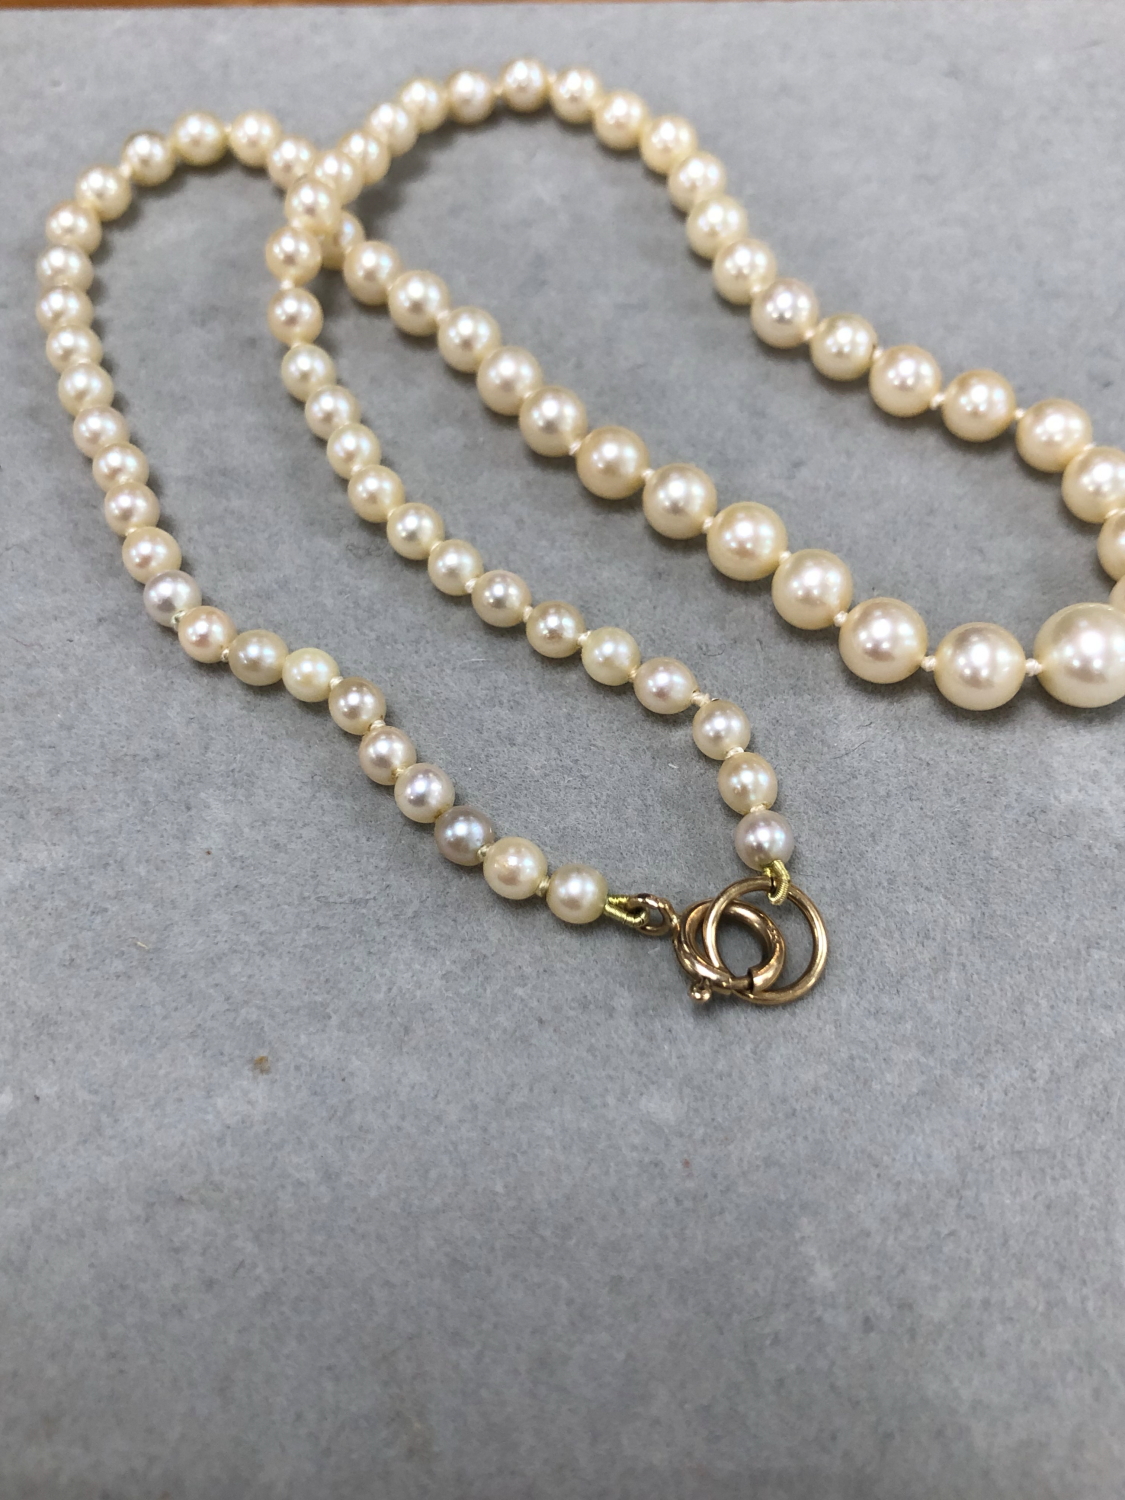 A PRINCESS ROW OF GRADUATED CULTURED PEARLS, KNOTTED WITH GOLD FITTINGS. LENGTH 46cms. - Image 2 of 3